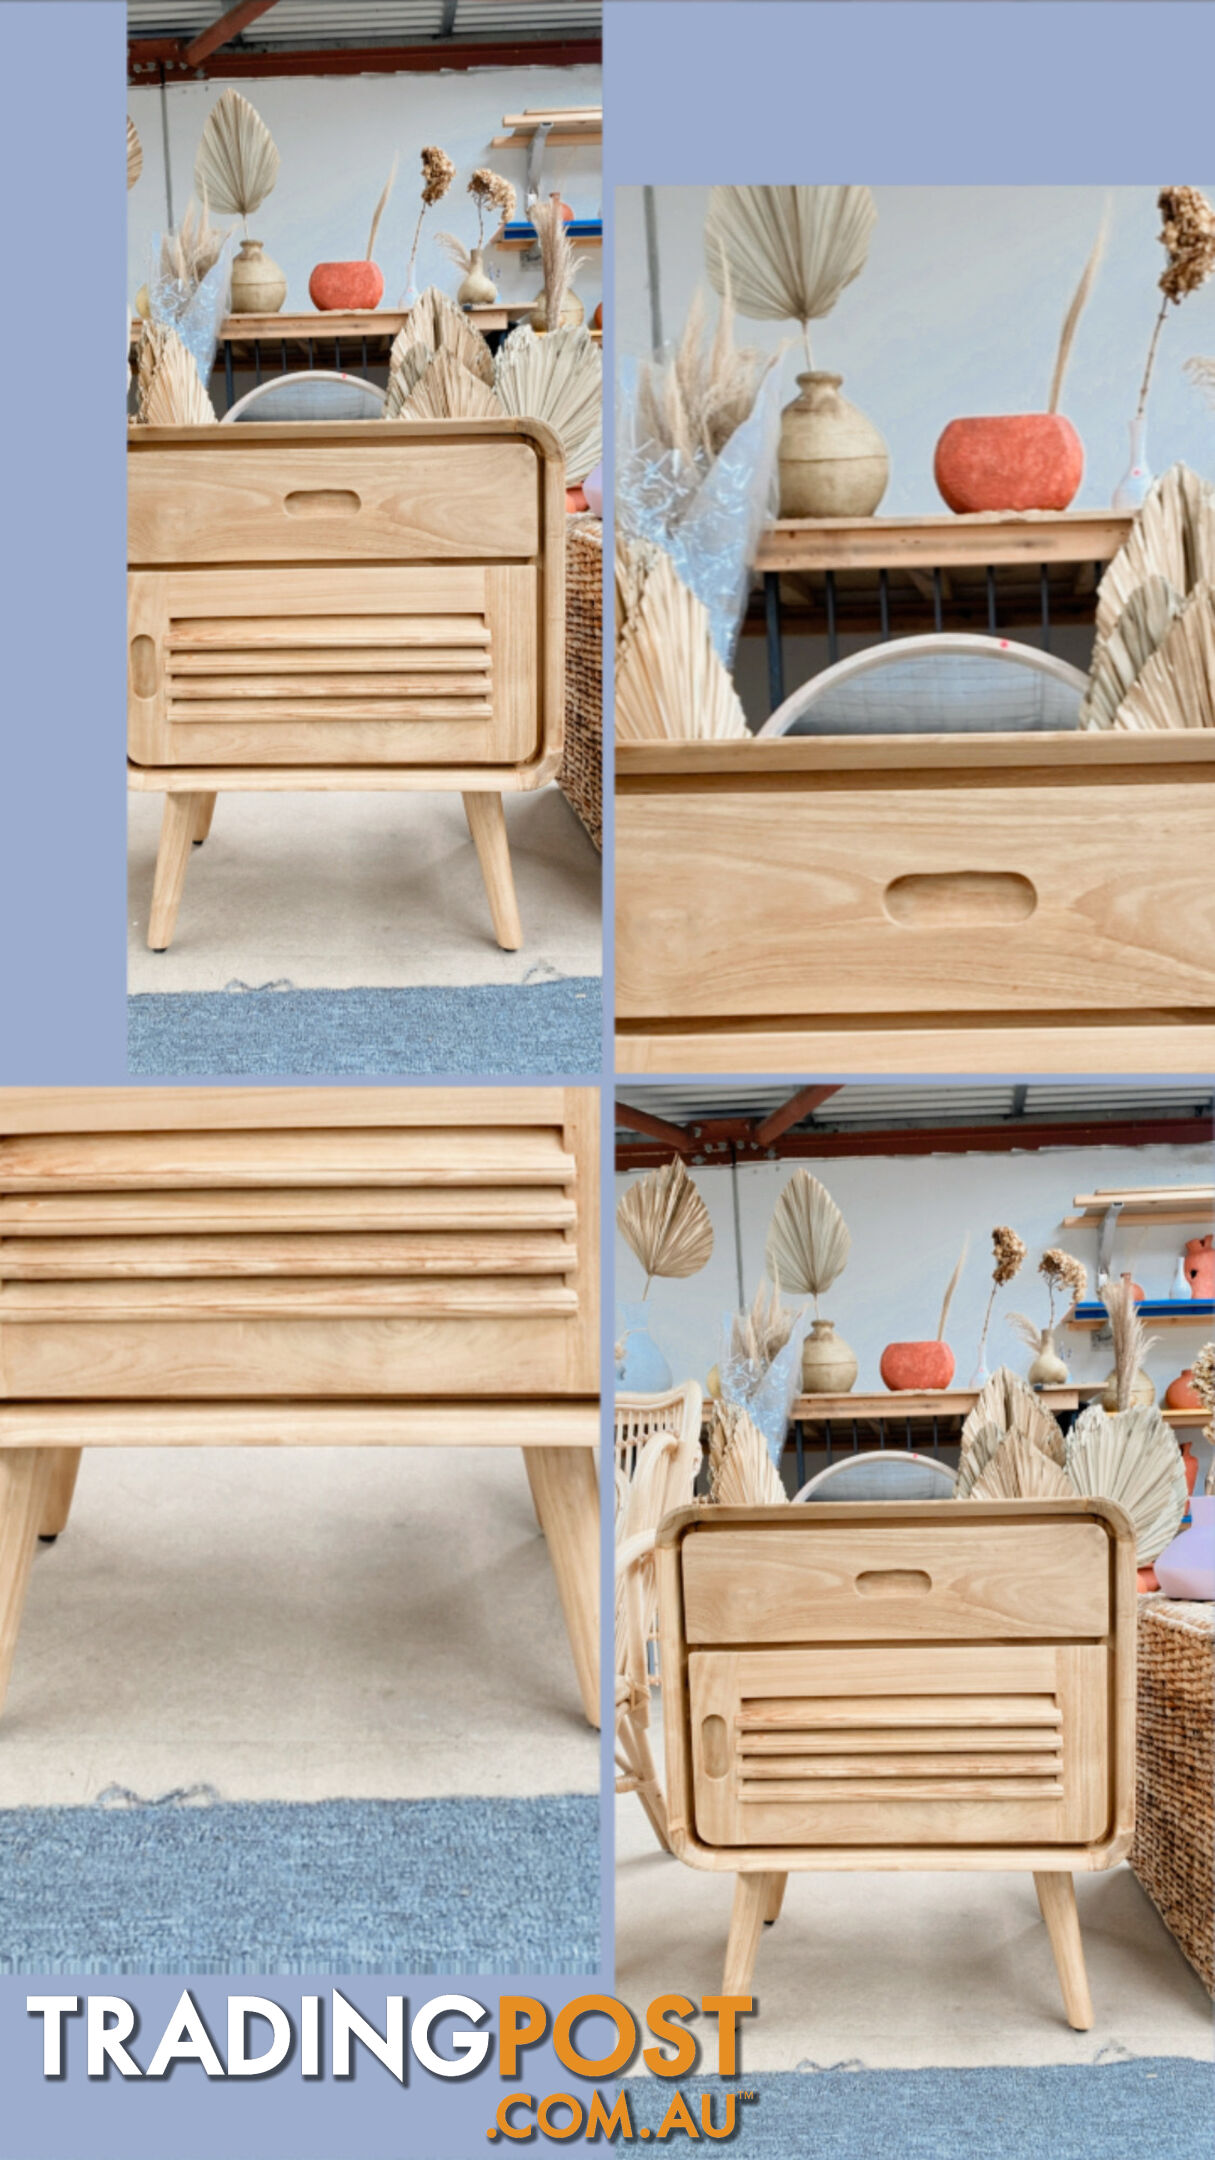 Bedside Table / Side Table, One Door & One Drawer